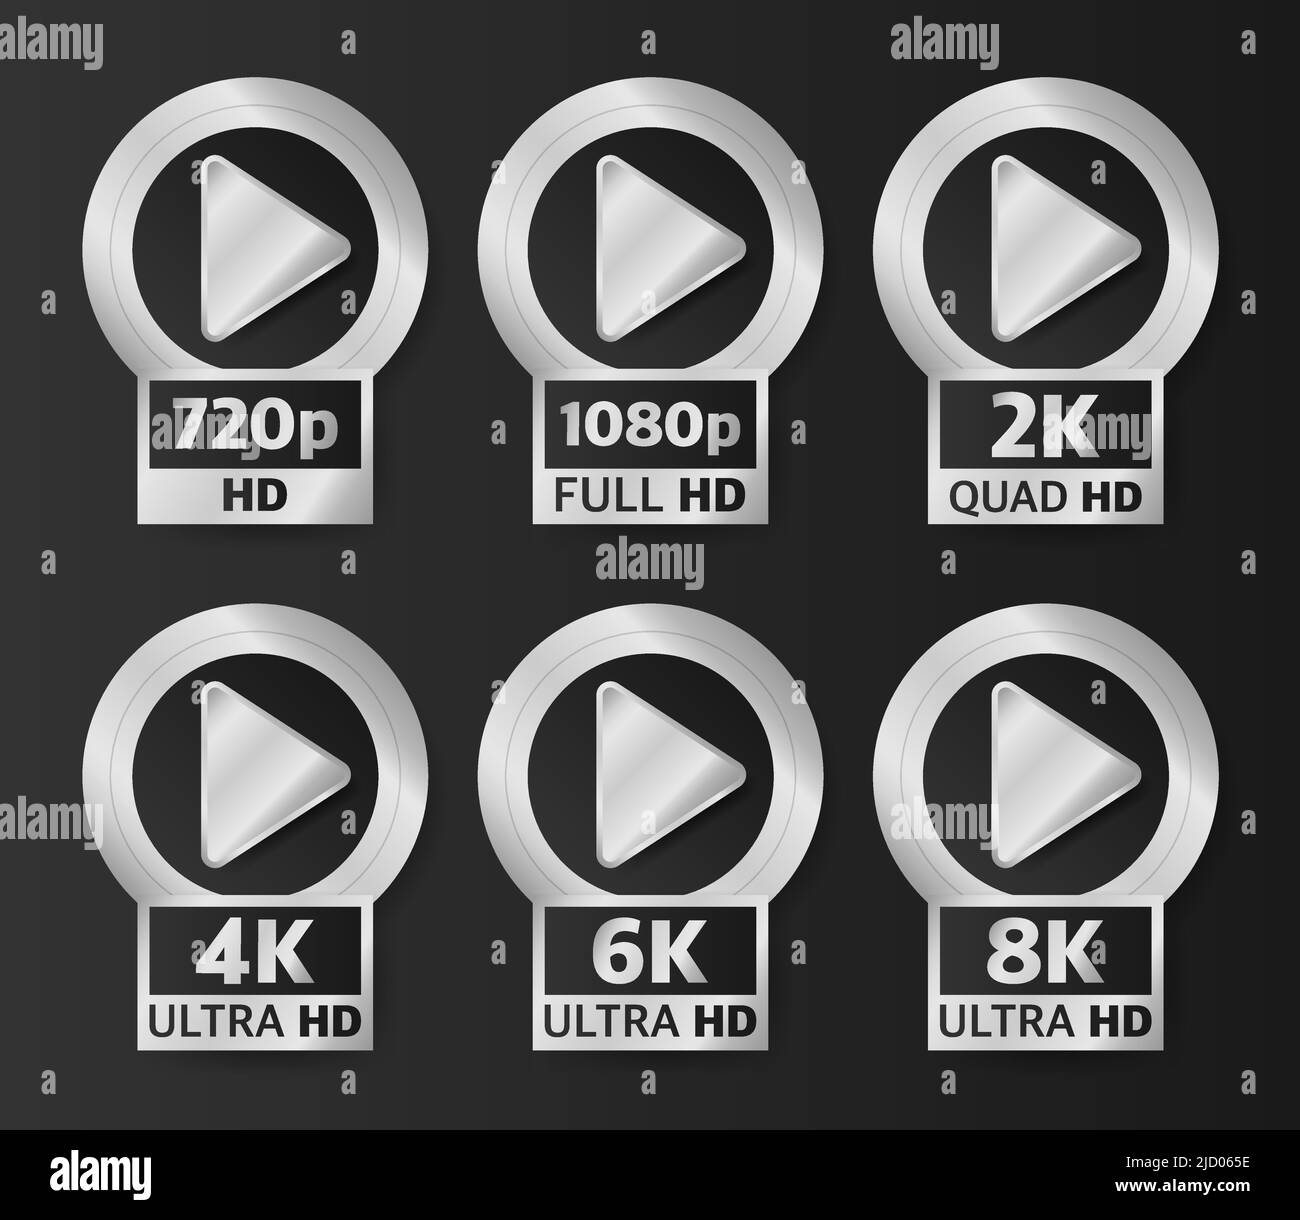 Video Quality Badges in silver color on black background. Hd, Full Hd, 2K, 4K, 6K and 8K. Vector illustration. Stock Vector